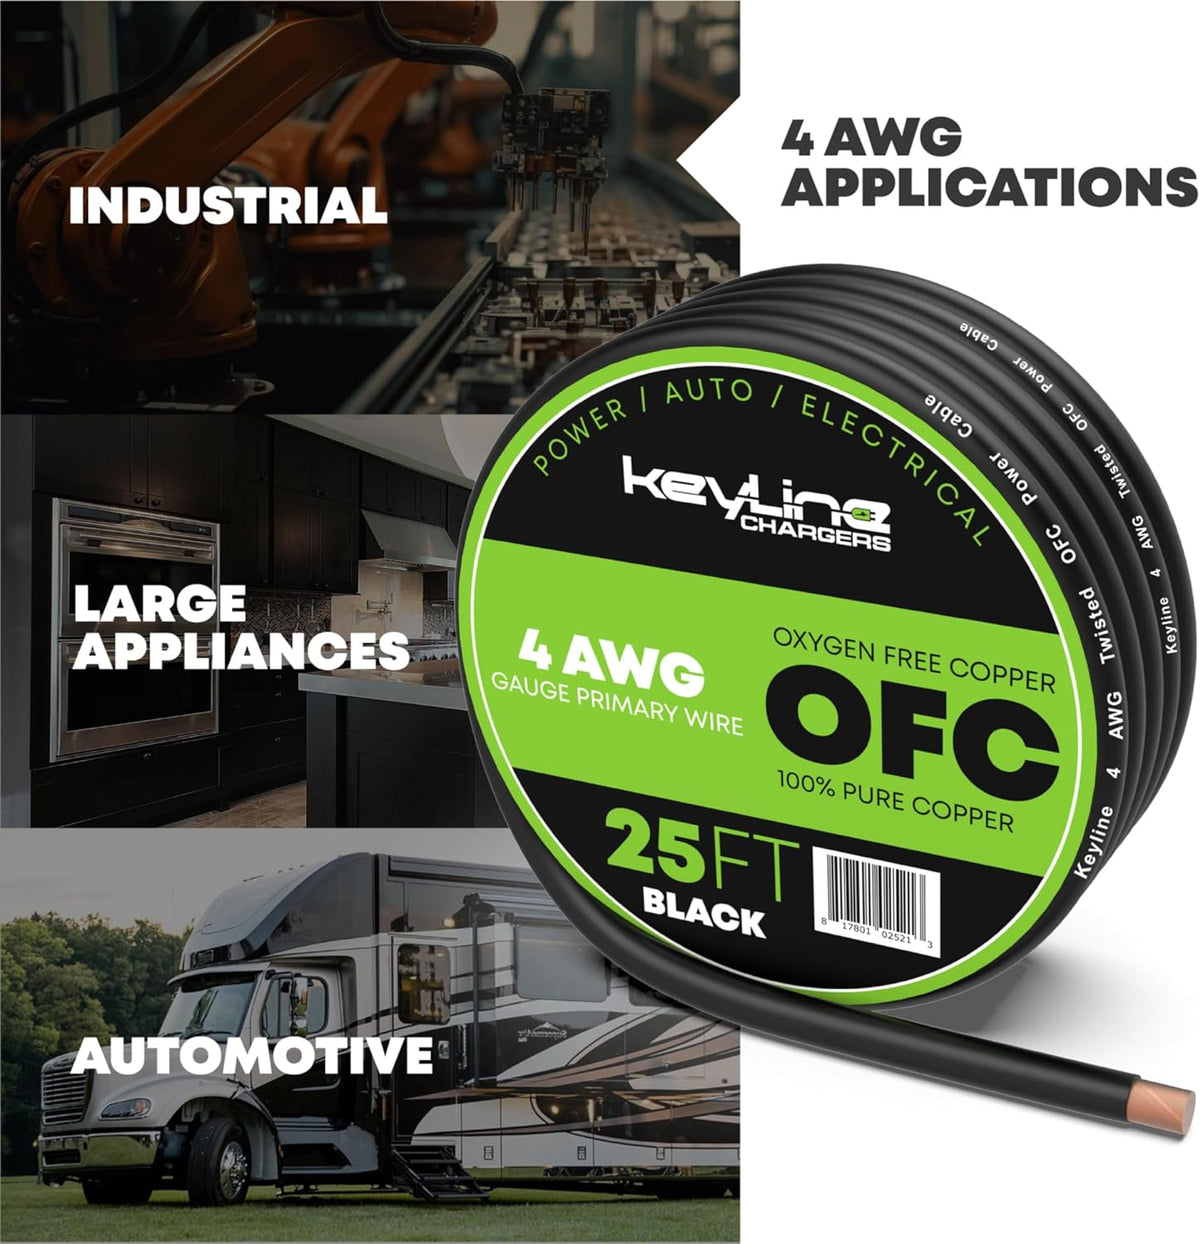 4 AWG Gauge Wire (25ft) Black | Oxygen Free Copper (OFC), Automotive Wire, Power/Ground, Battery Cable, True Spec Welding & Automotive, Car Audio Speaker, RV Trailer, Amp Wiring by Keyline Chargers